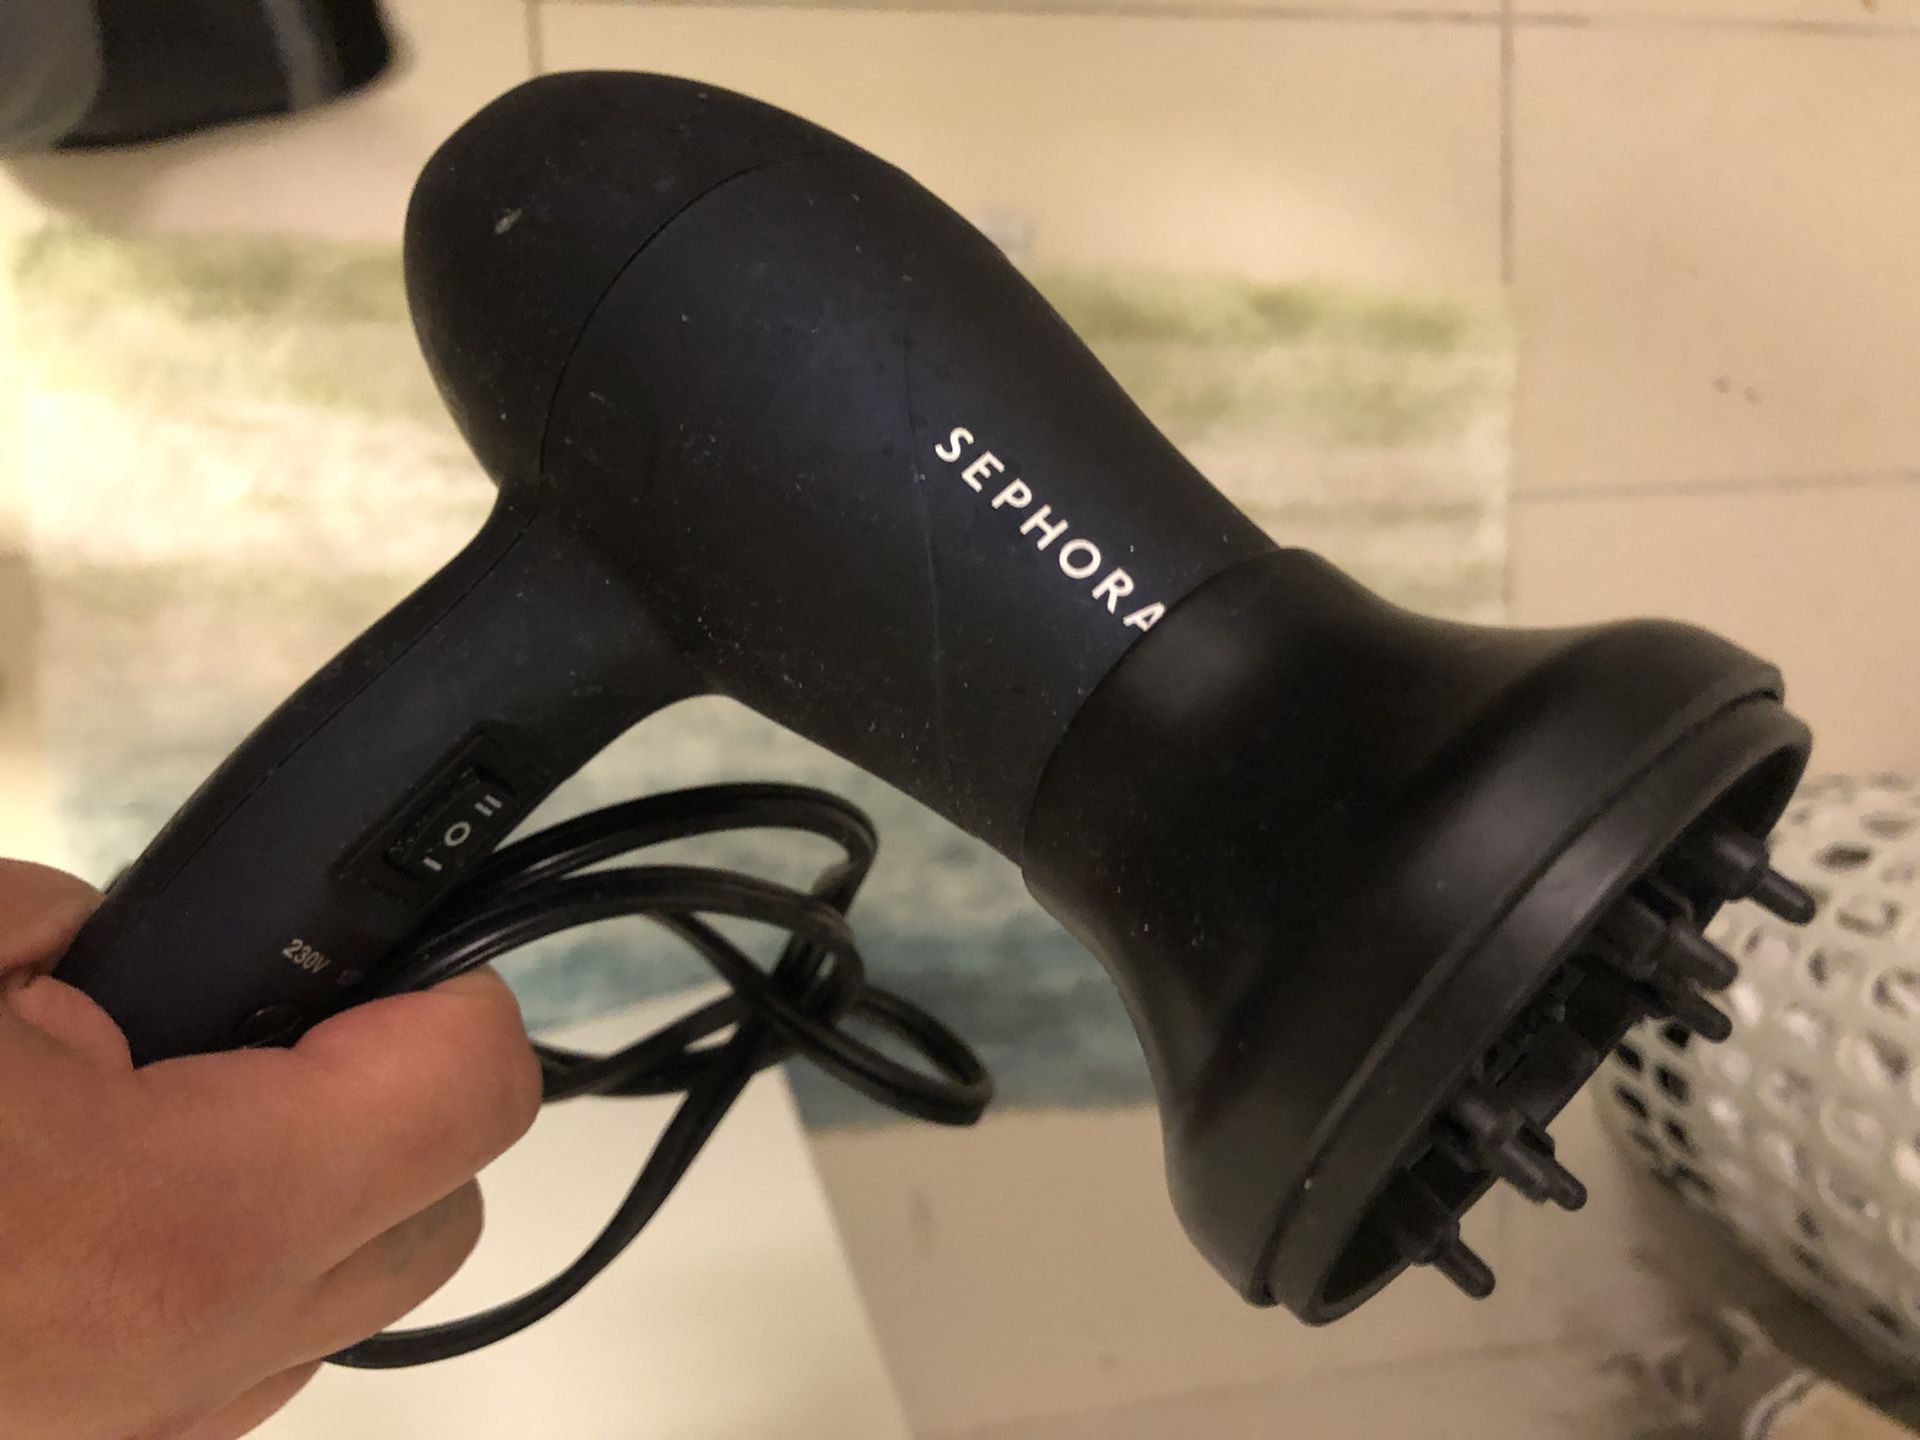 Sephora Hair Dryer for Curly Hair. Small